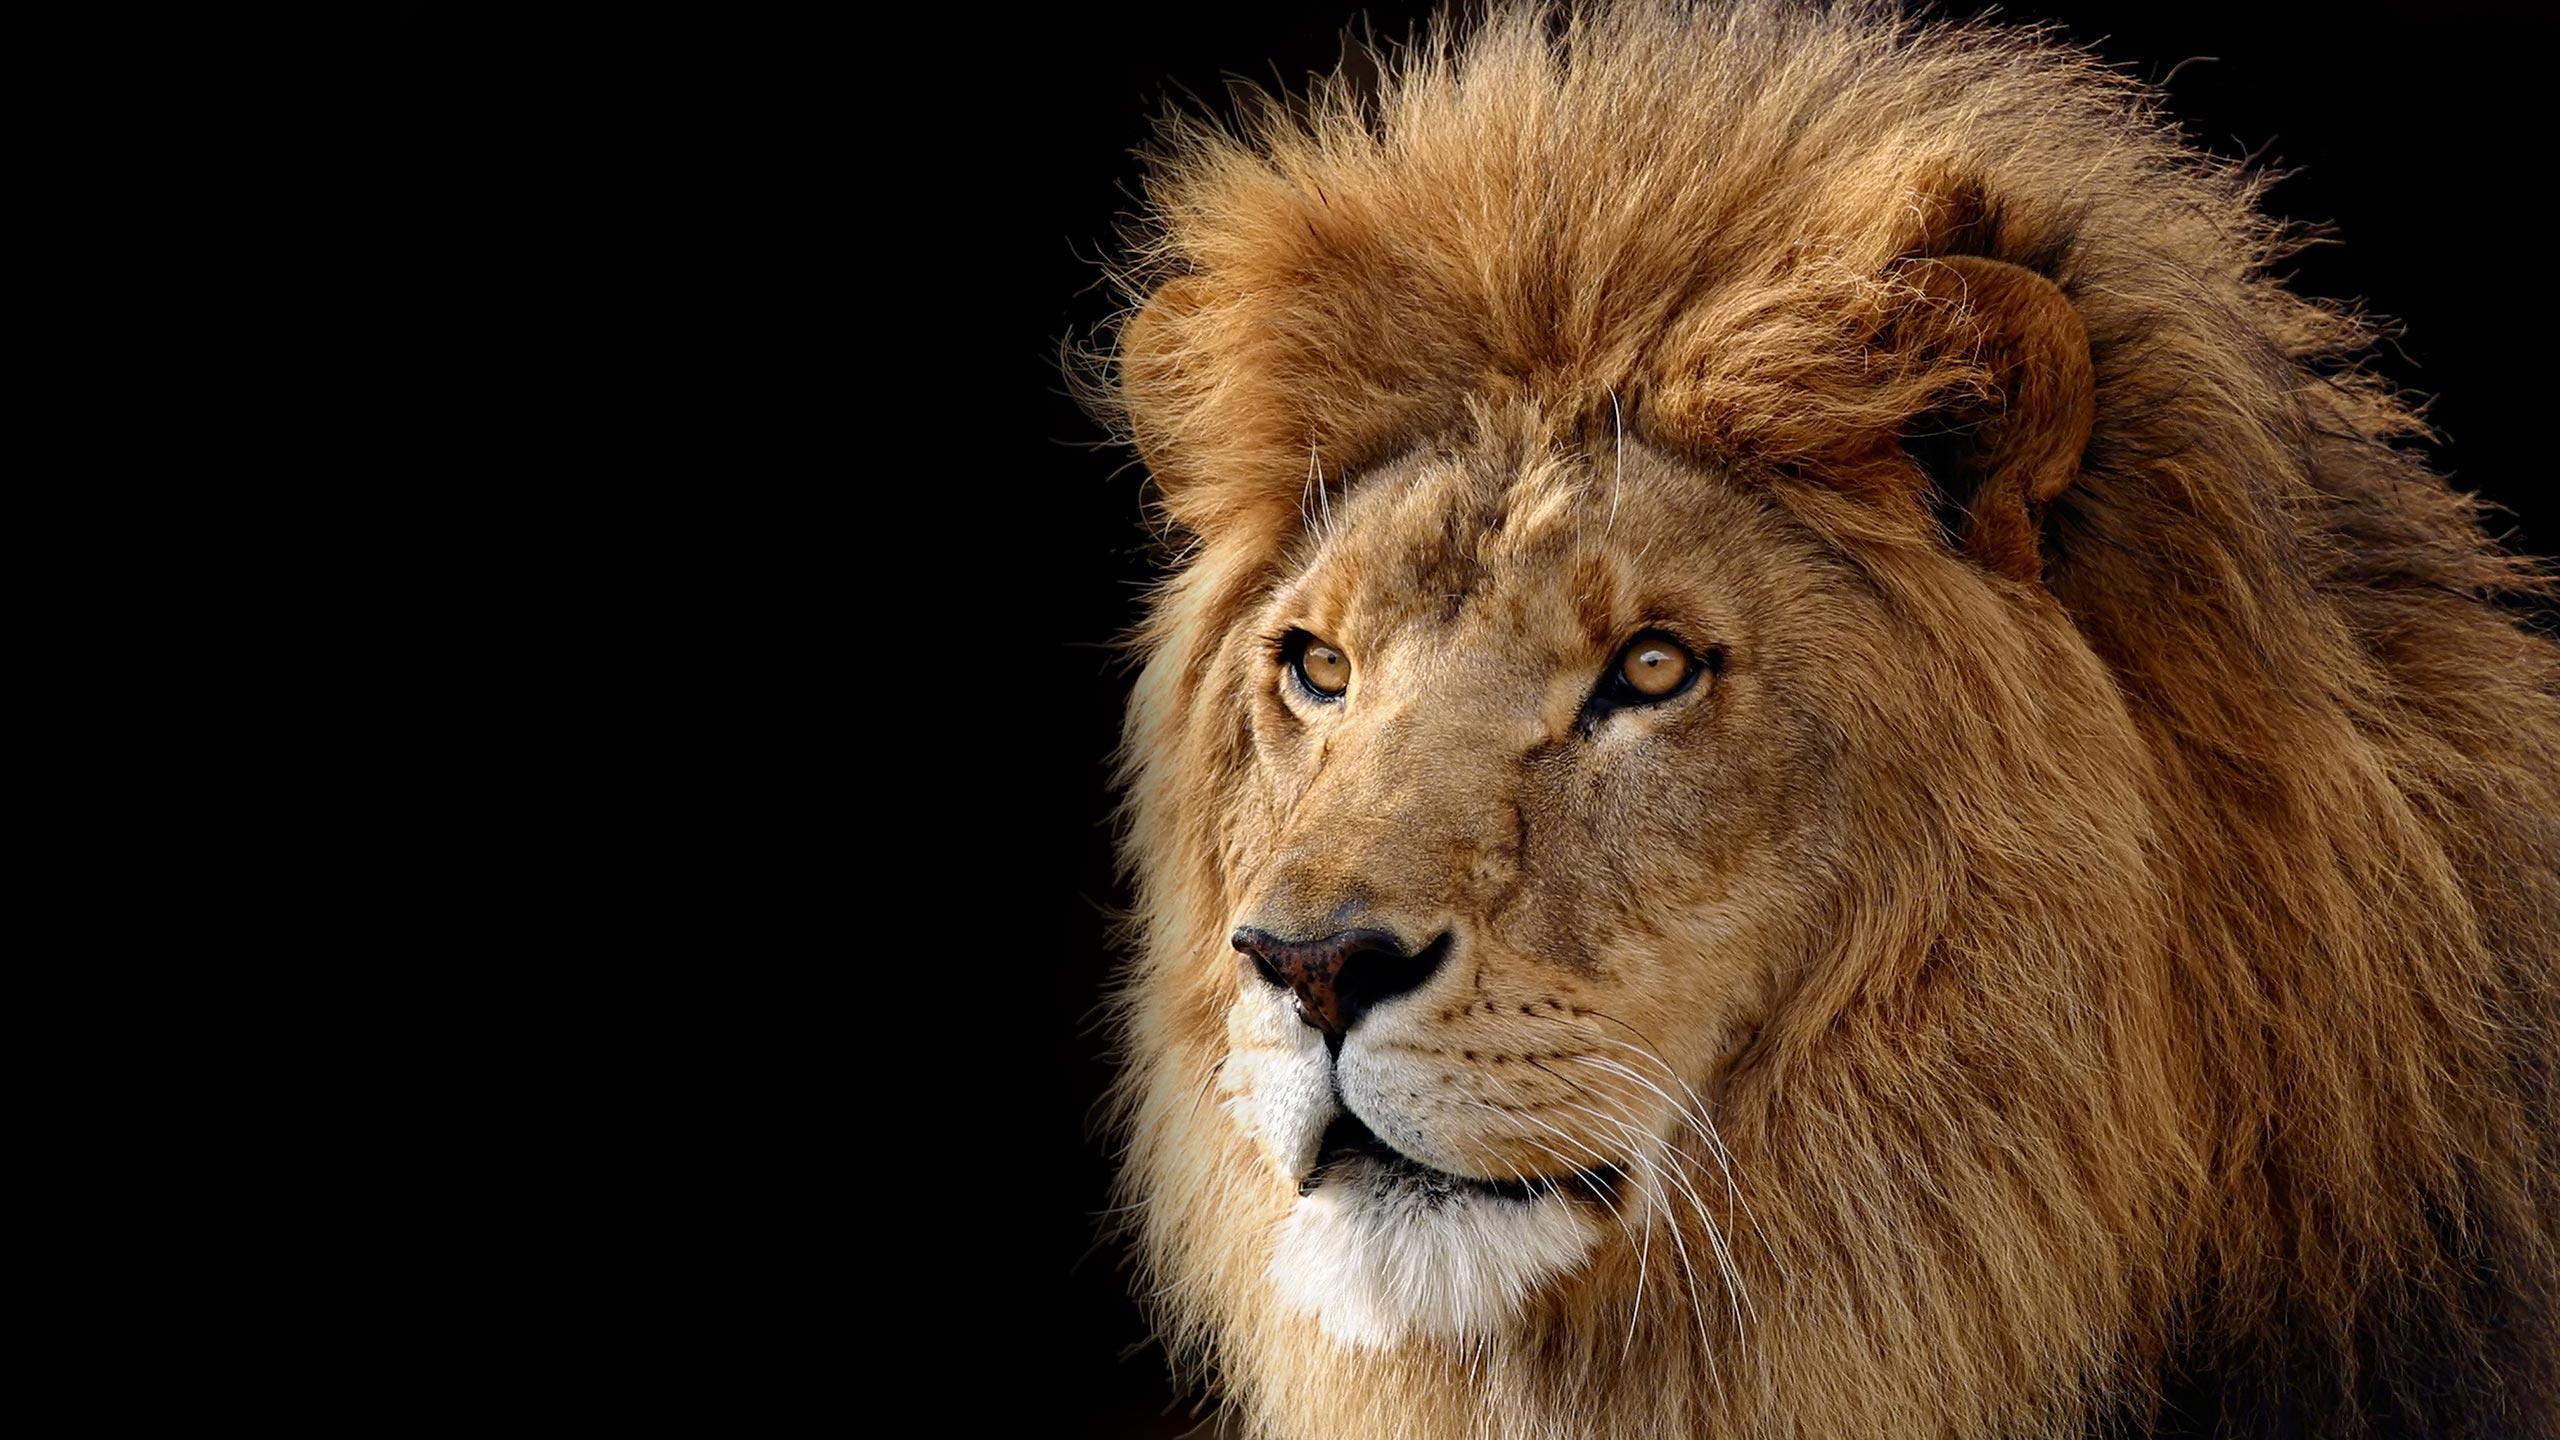 Lion Wallpaper Widescreen Image & Picture